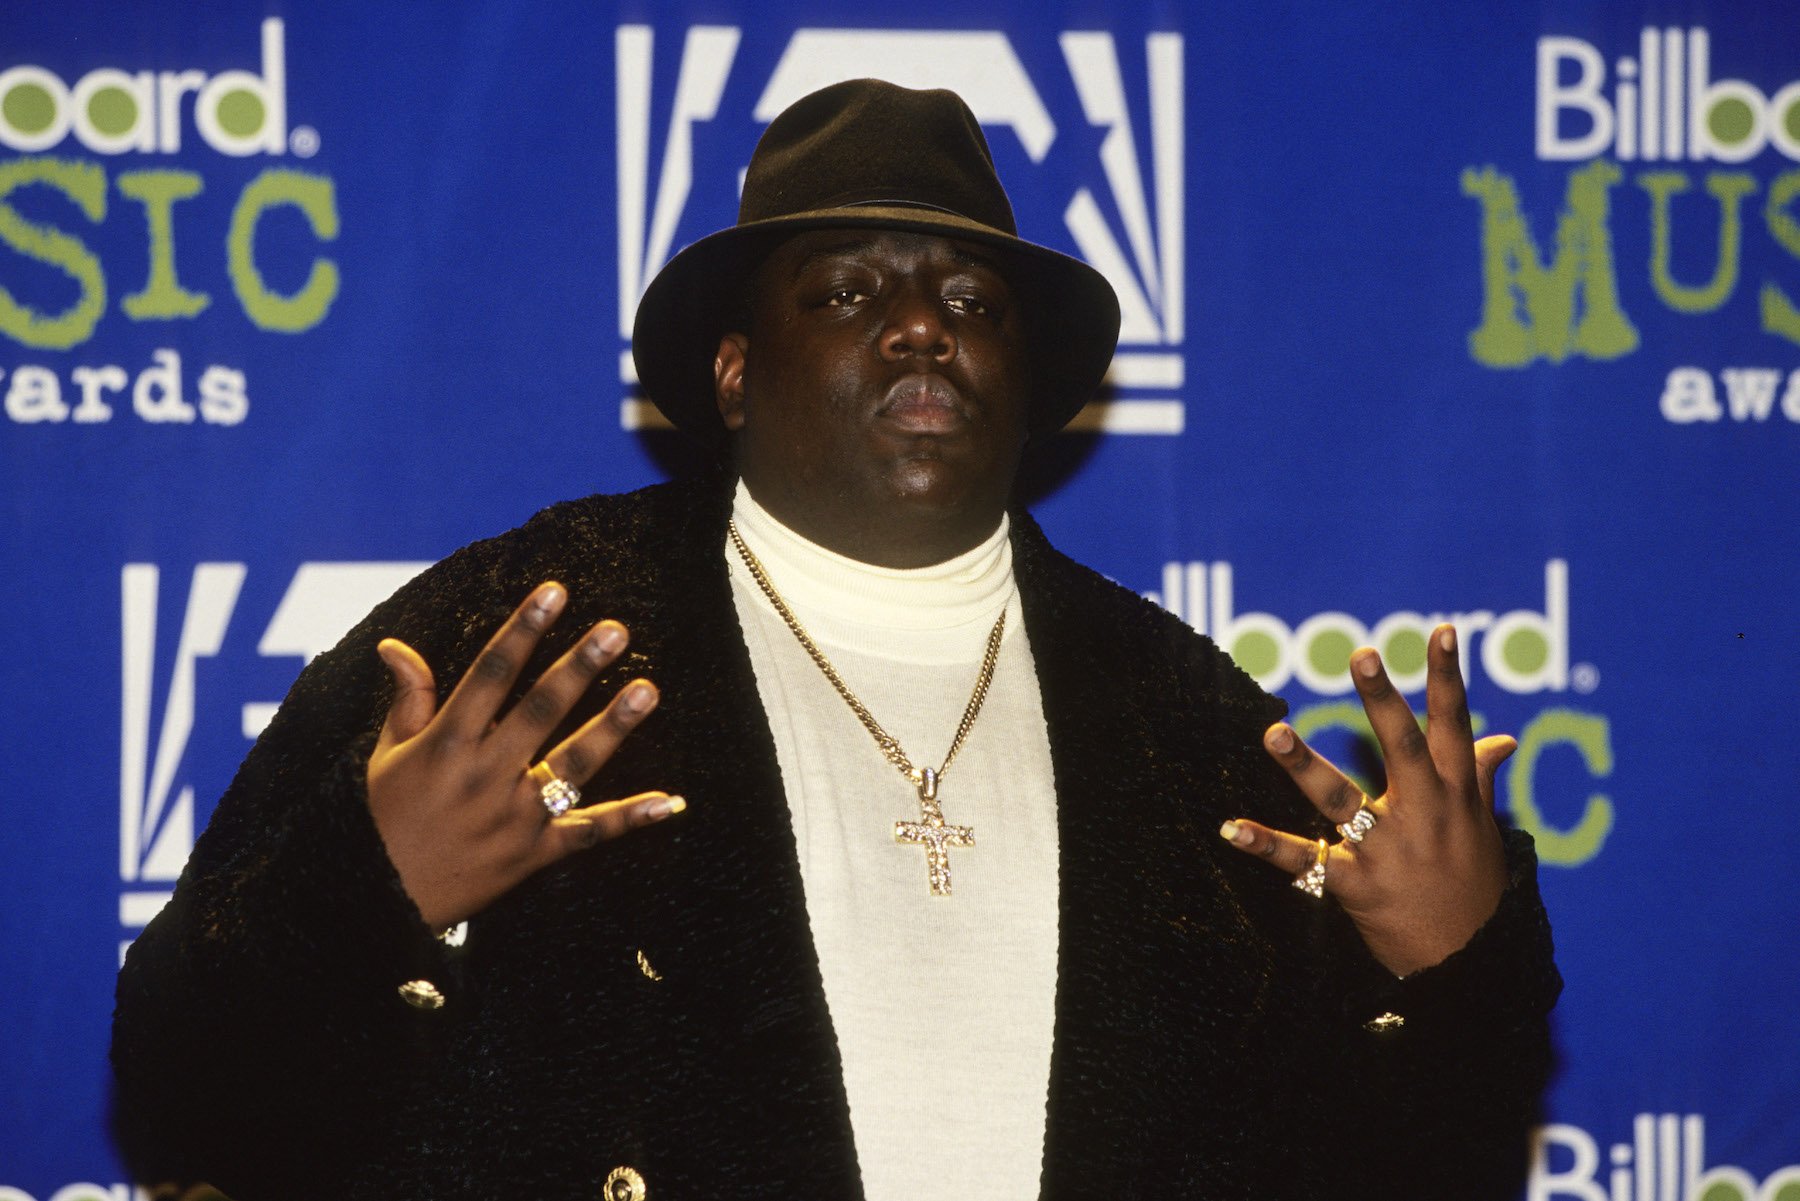 The Notorious B.I.G. showing off his jewelry on the red carpet